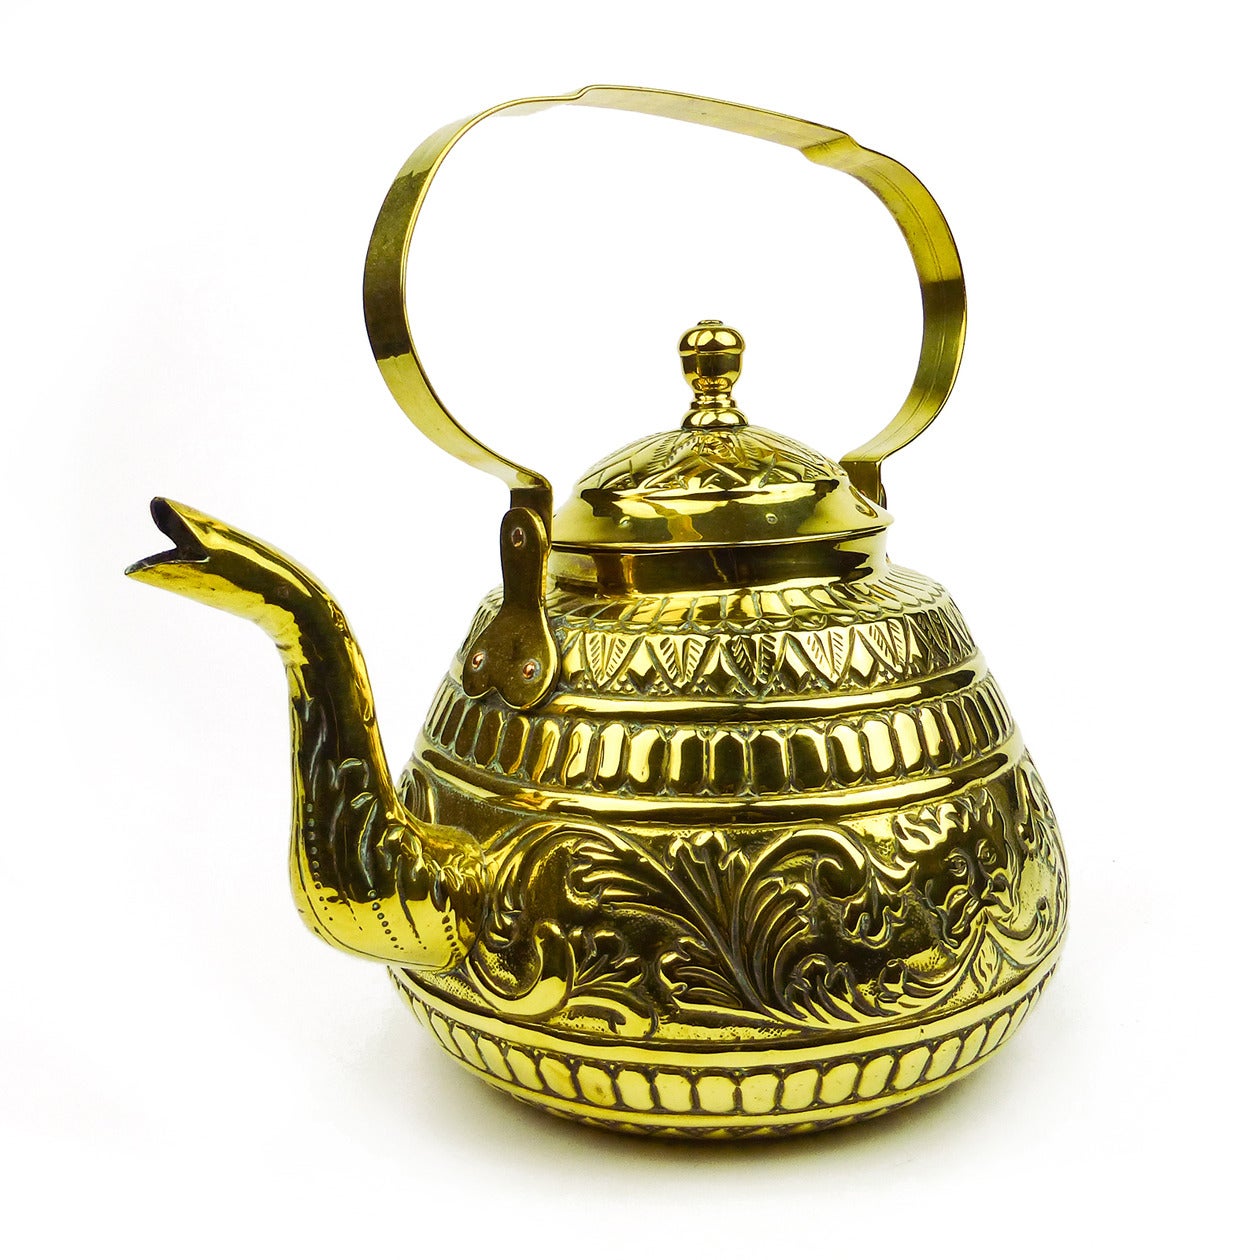 Dutch brass tea pot with swing handle and beautiful decoration, circa 1800
Perfect condition and could be used.
Measures: Diameter of body 8?, height including handle 11?.